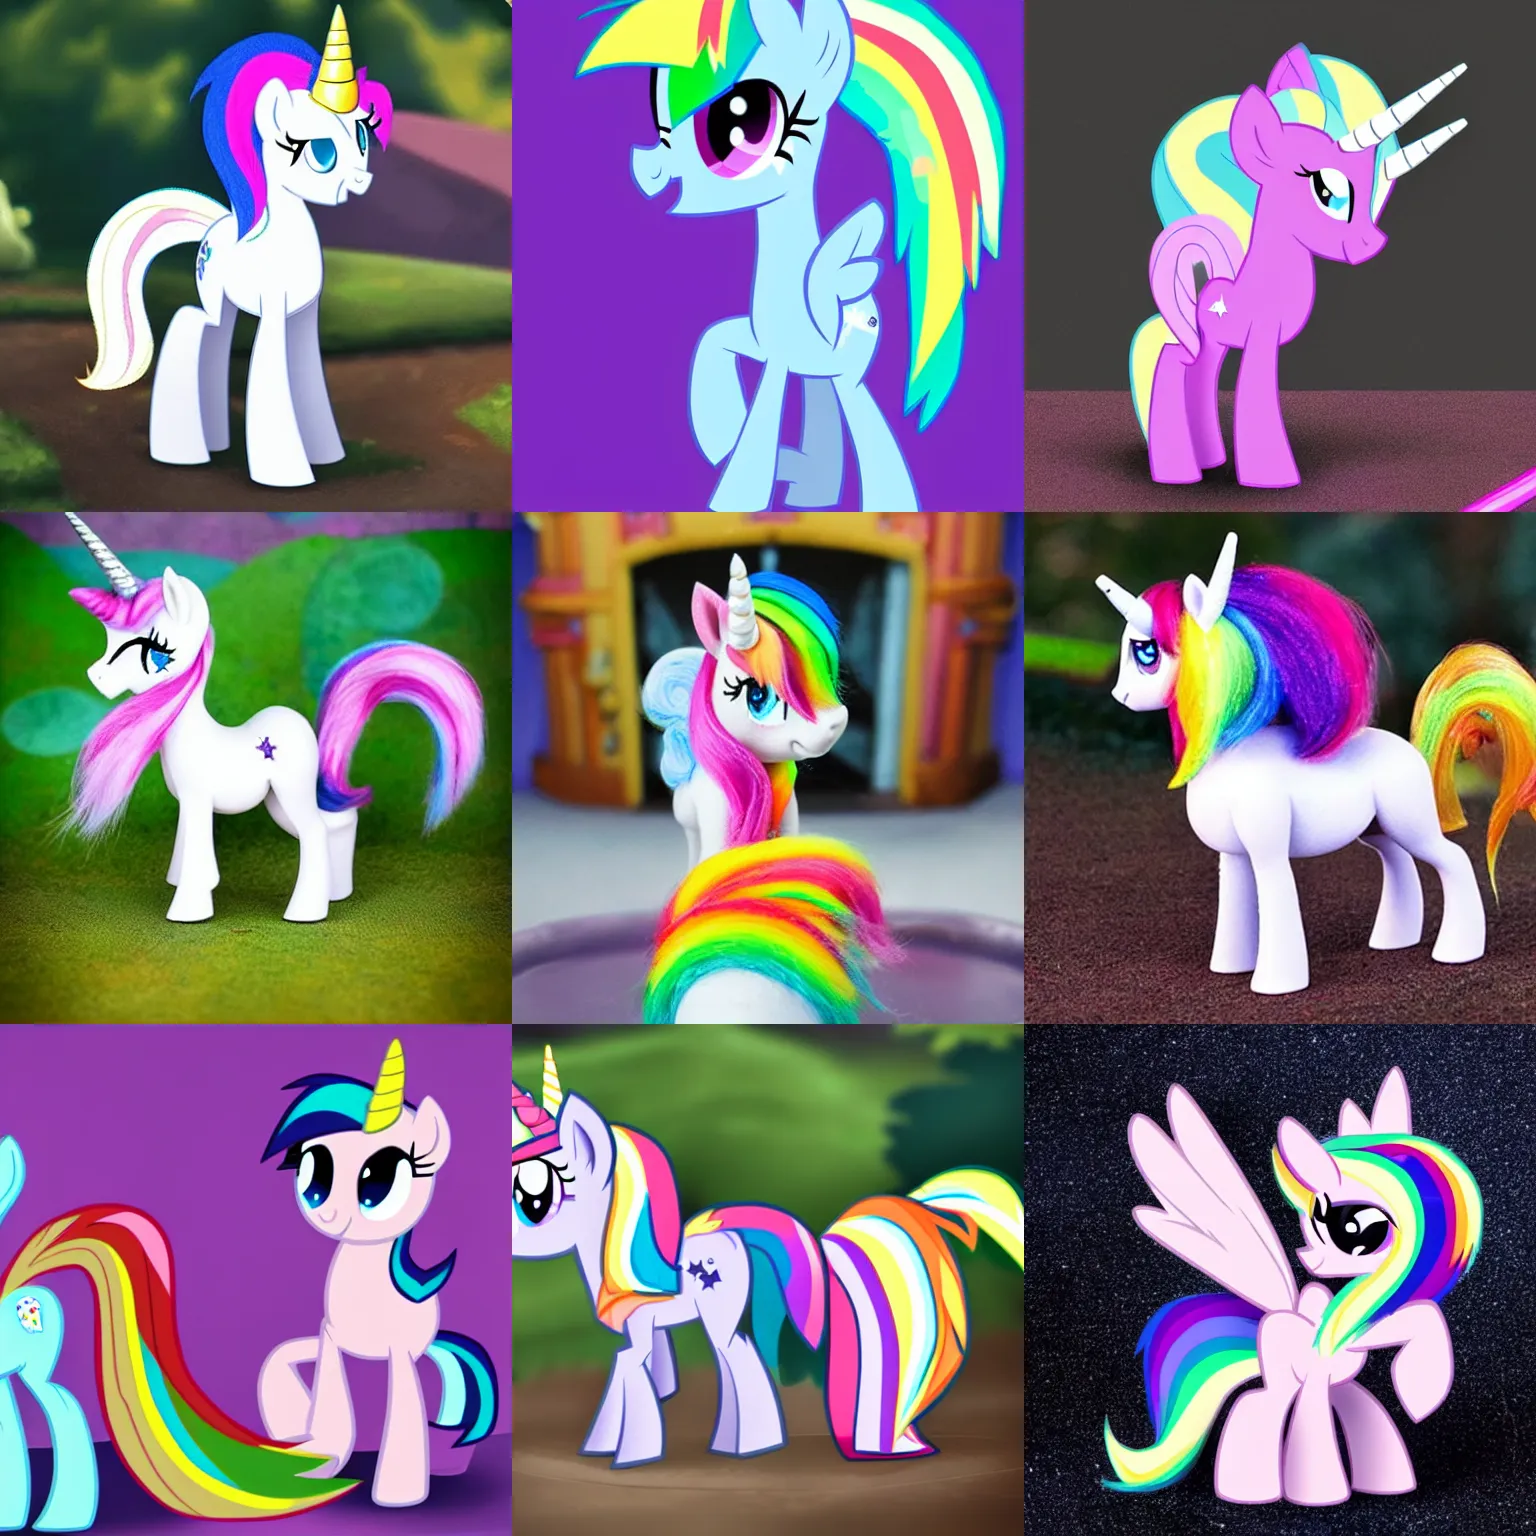 Prompt: the worlds smallest unicorn pony ever conceived starring on a reality TV show to find the cutest contestant in the style of my little pony friendship is magic